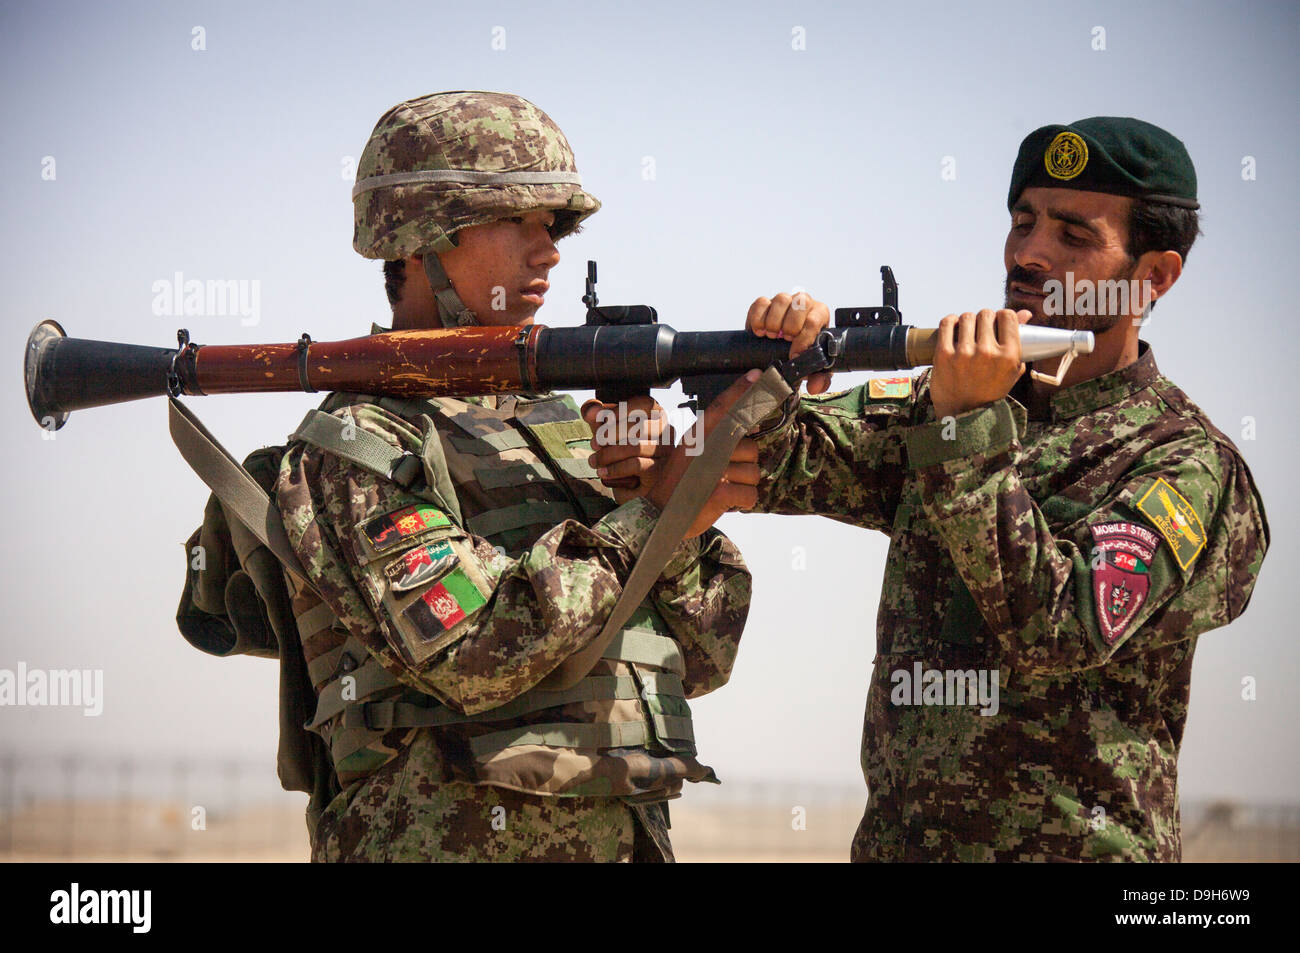 An Afghan National Army soldier with the Kandak Special Operations forces prepares to fire a RPG-7 rocket-propelled grenade launcher during a live-fire exercise May 20, 2013 in Camp Shorabak, Afghanistan. Stock Photo